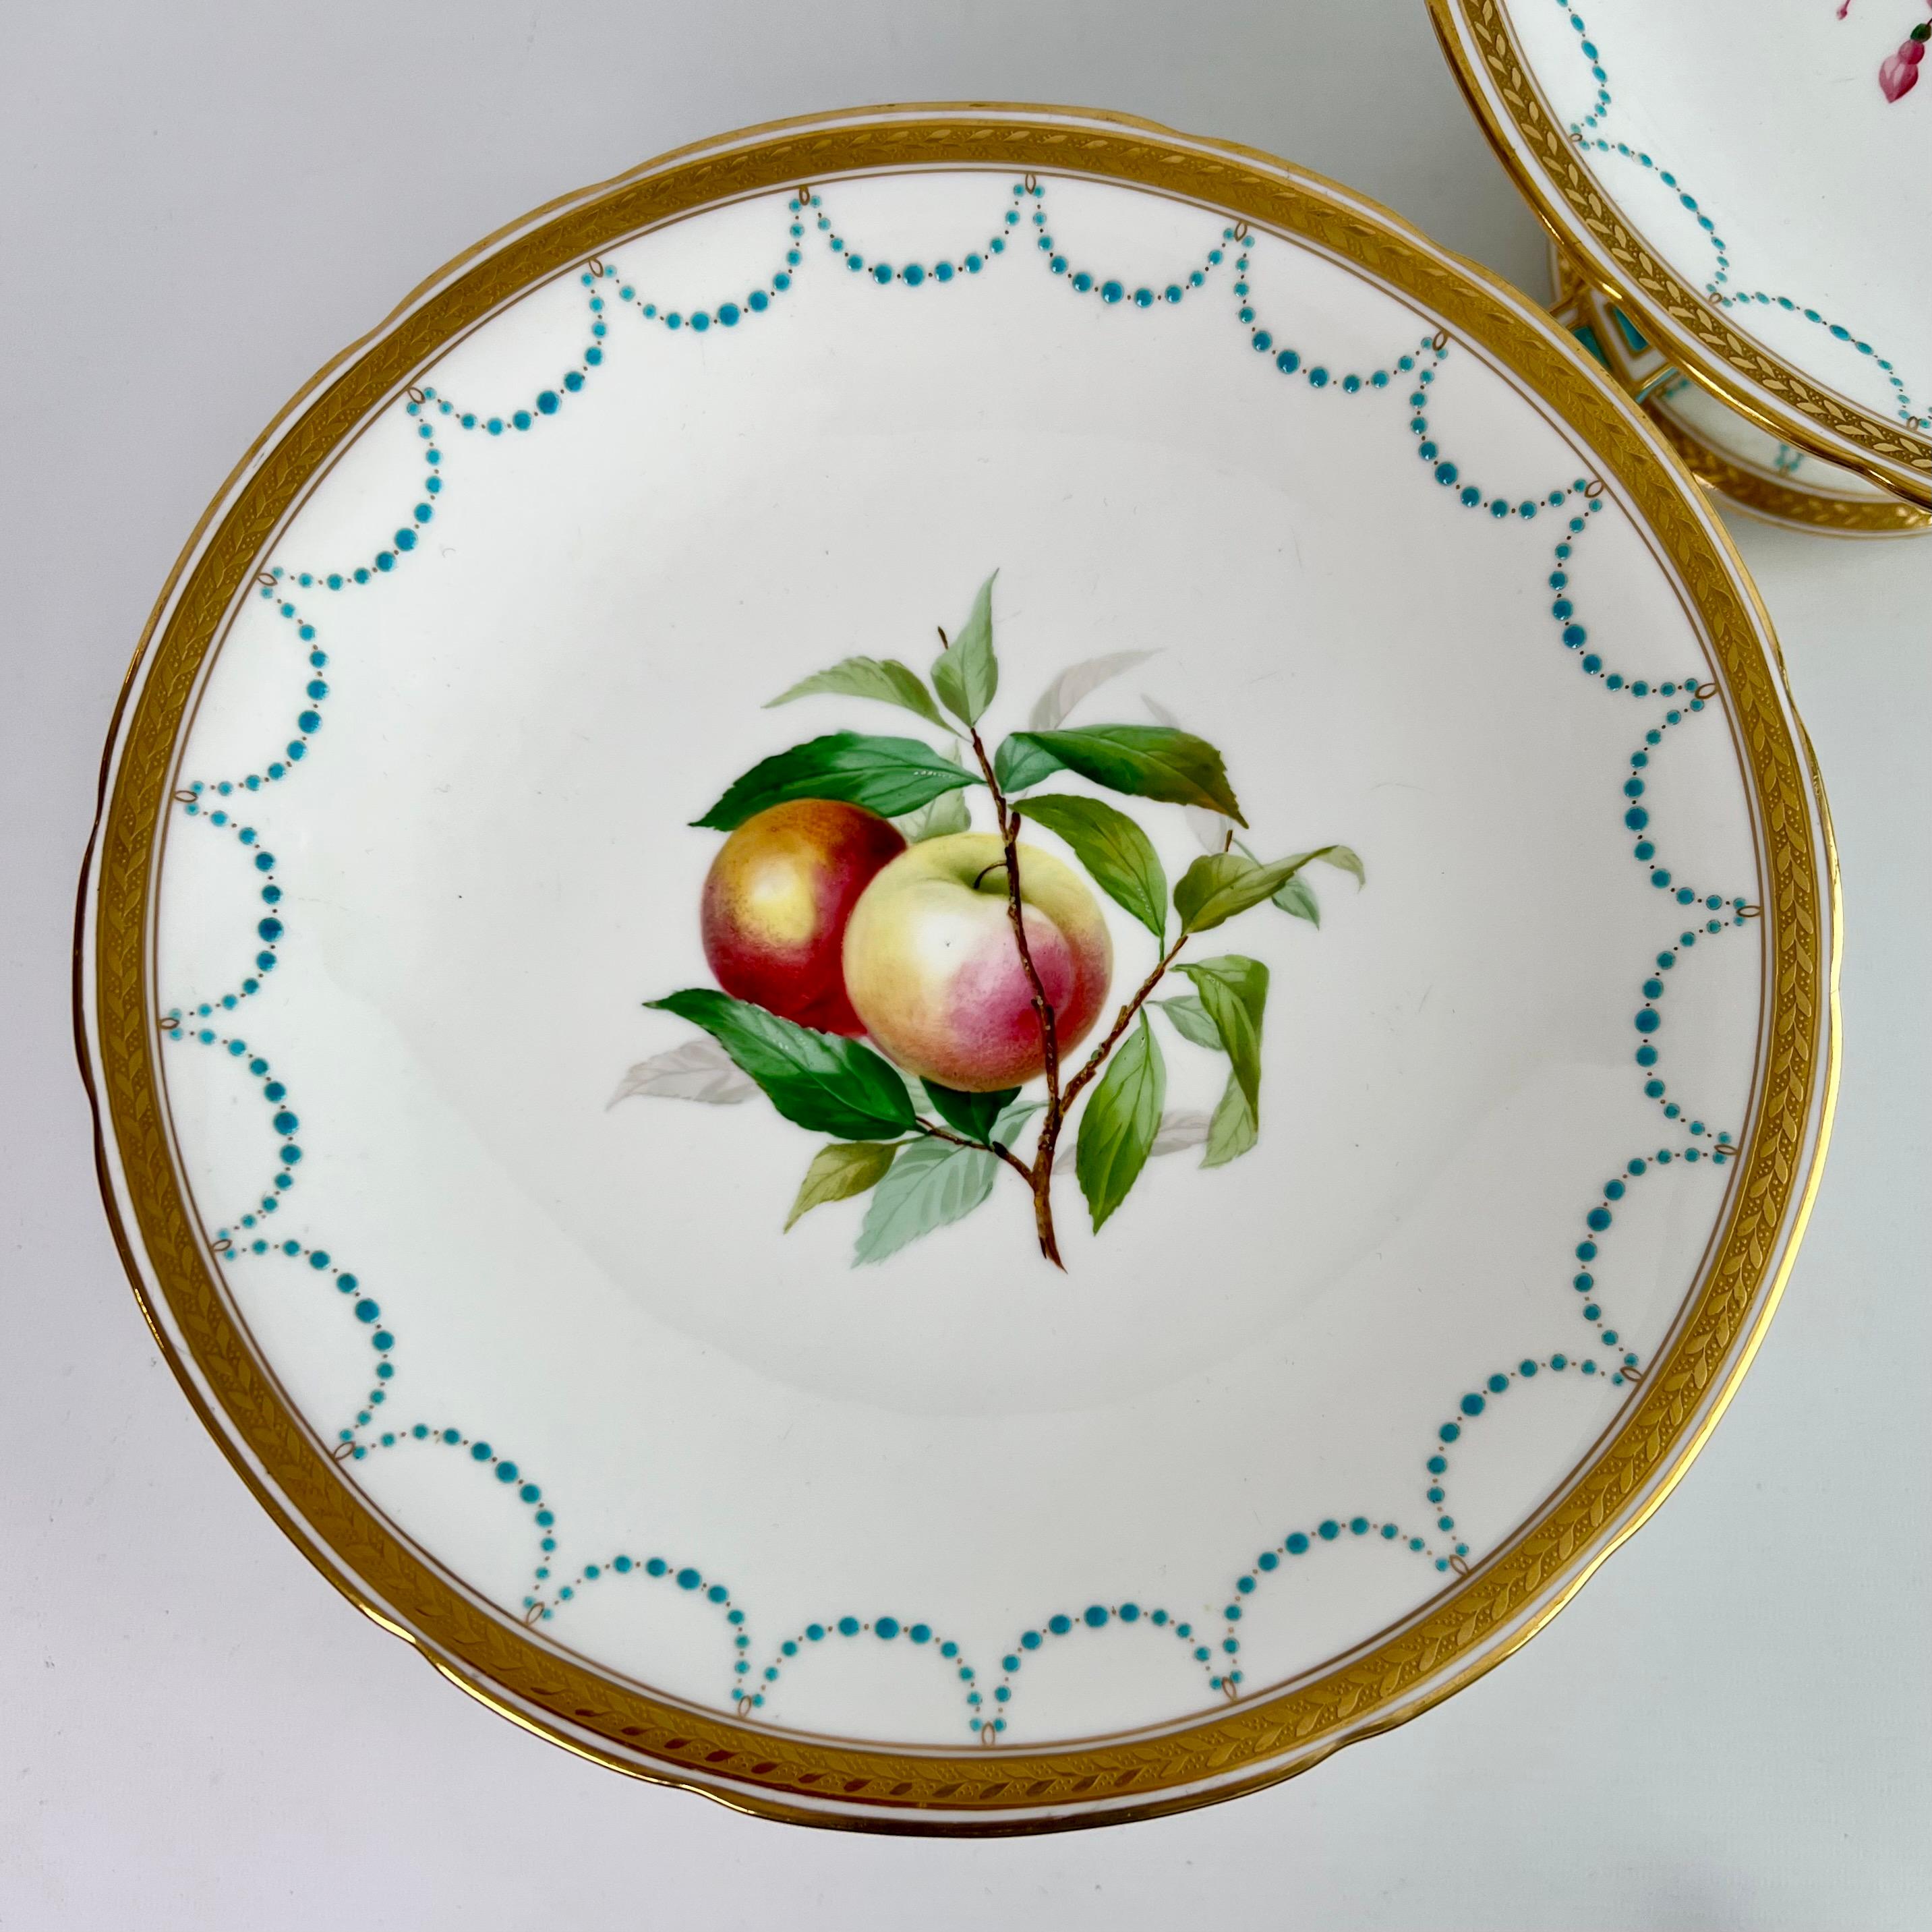 Minton Porcelain Dessert Service, Turquoise and Gilt, Flowers and Fruits, 1870 1